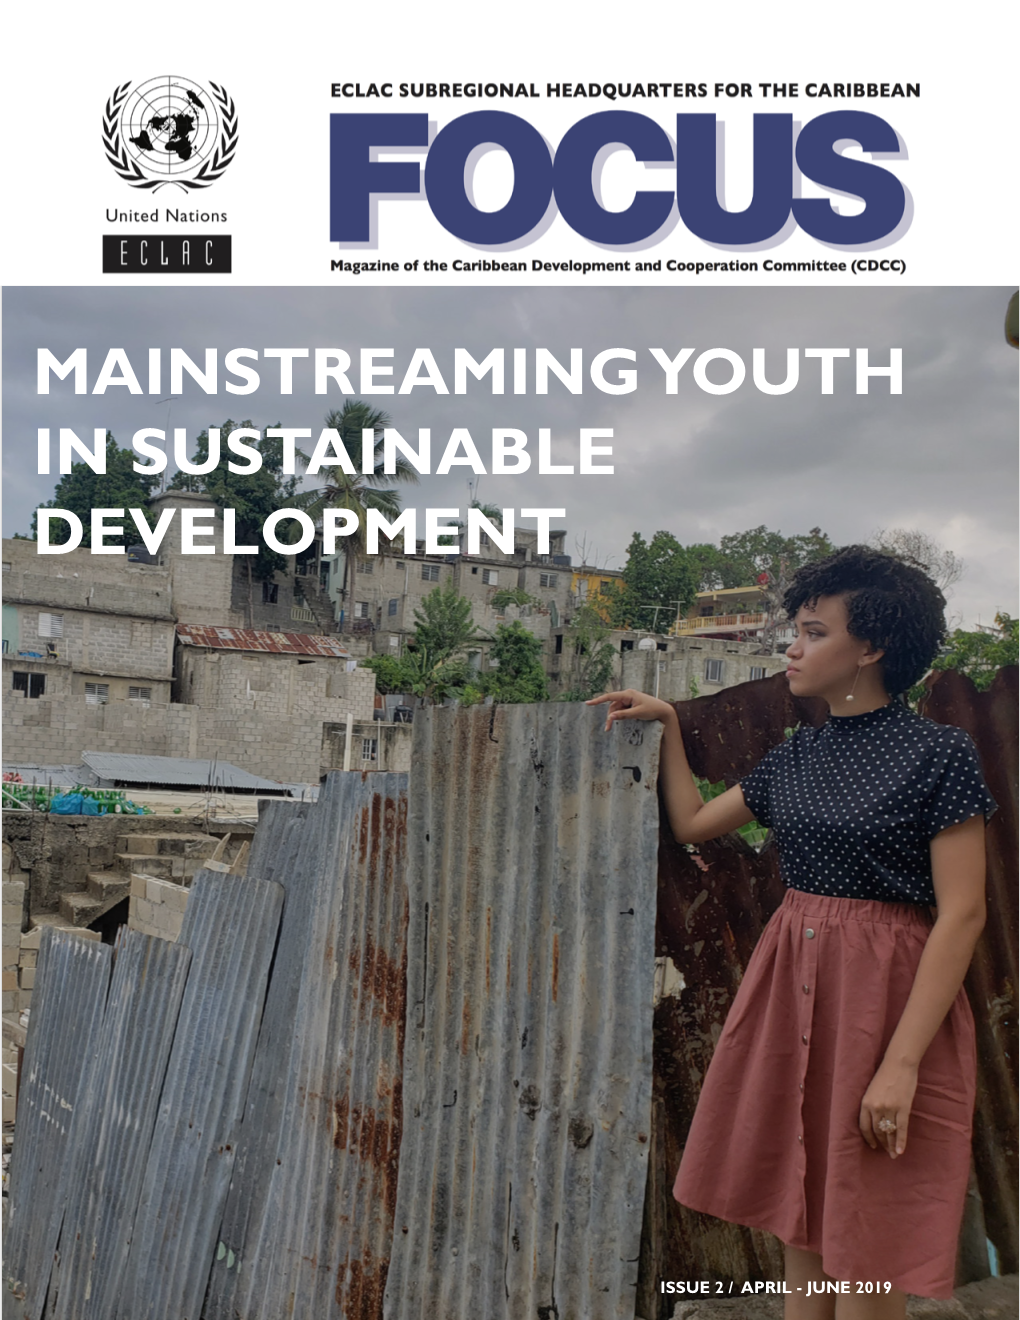 Mainstreaming Youth in Sustainable Development